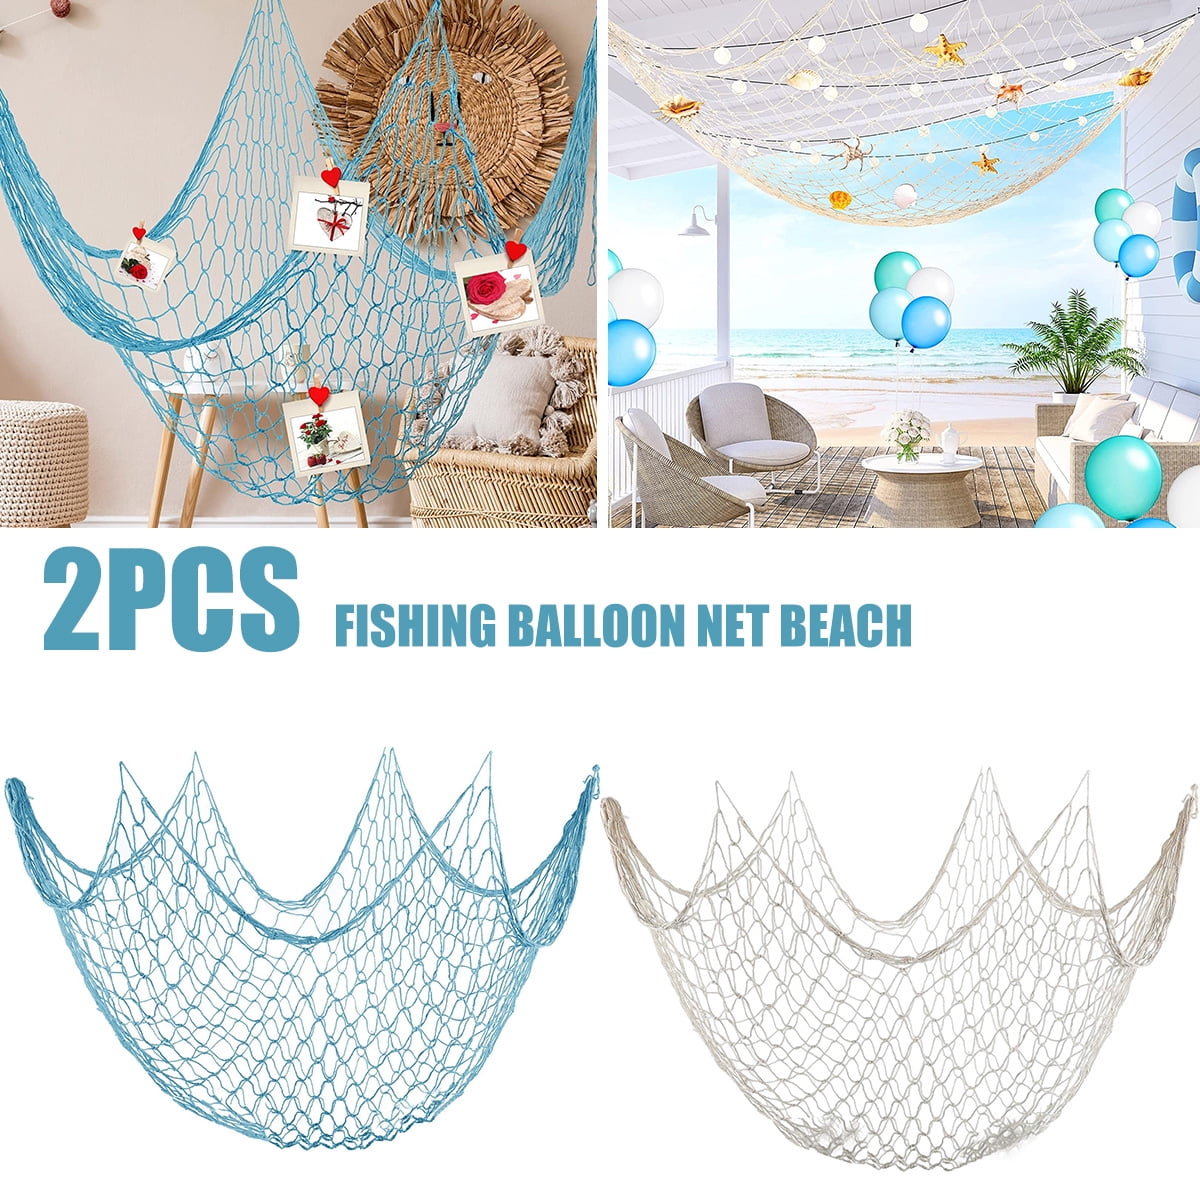 Decorative Fish Netting, Fishing Net Decor, 79 x 59inch Ocean Pirate Beach  Theme Party Home Decorations, Med…